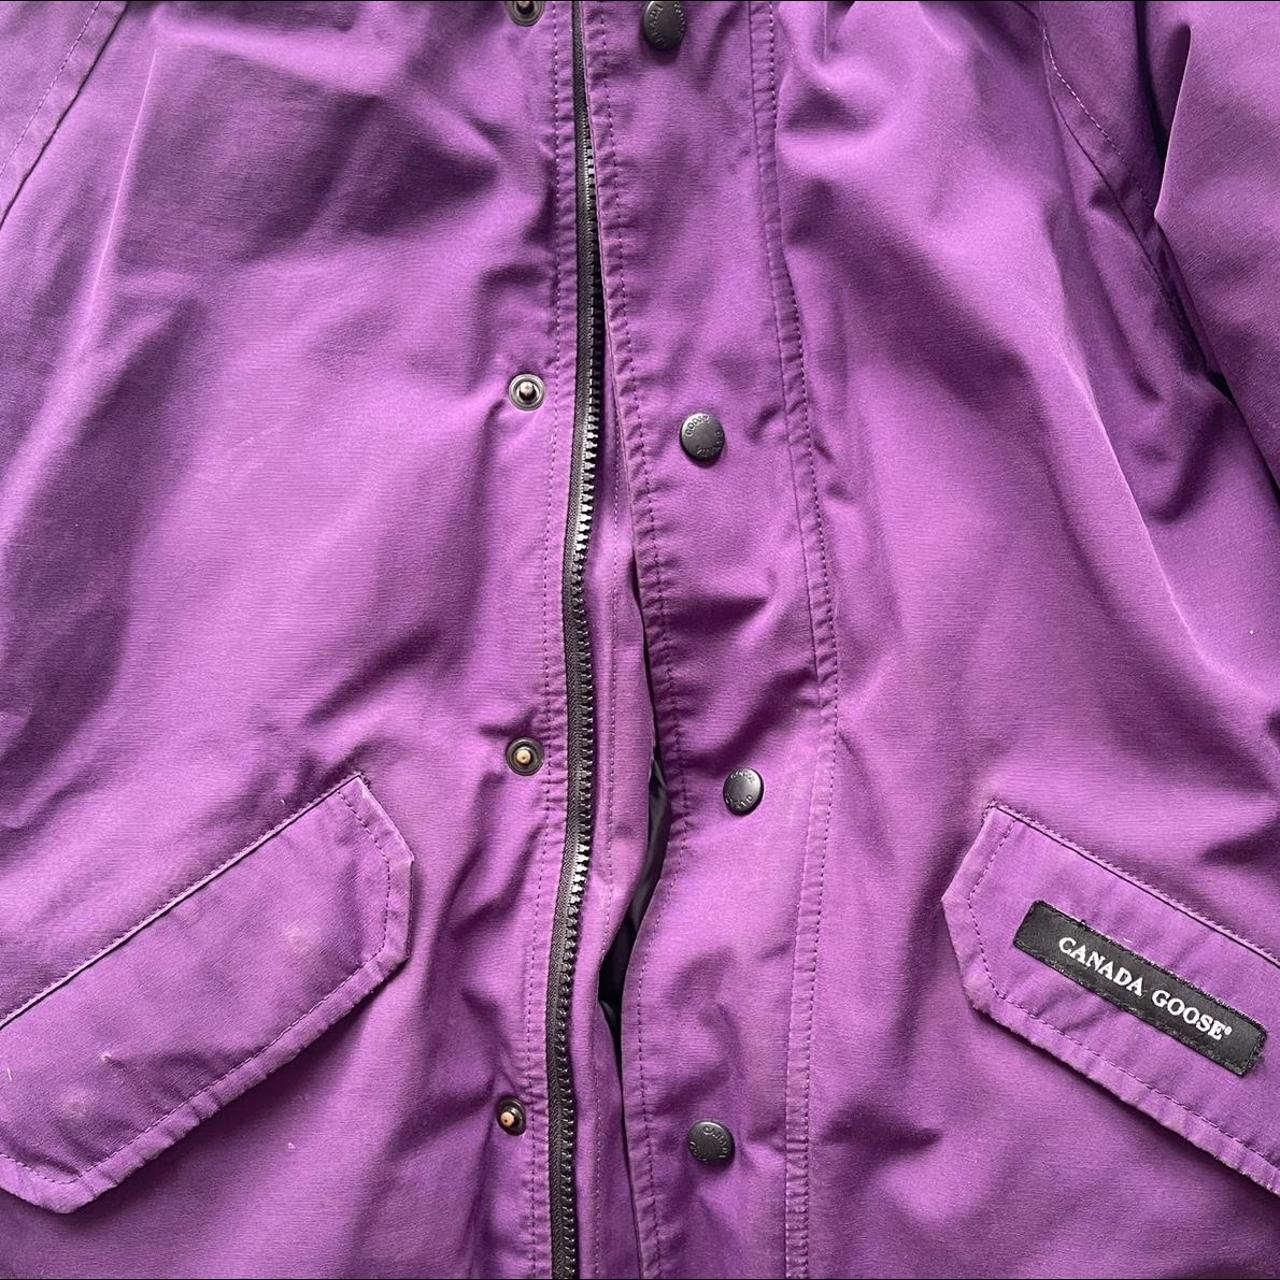 Selling this gorgeous purple Canada goose, in good... - Depop